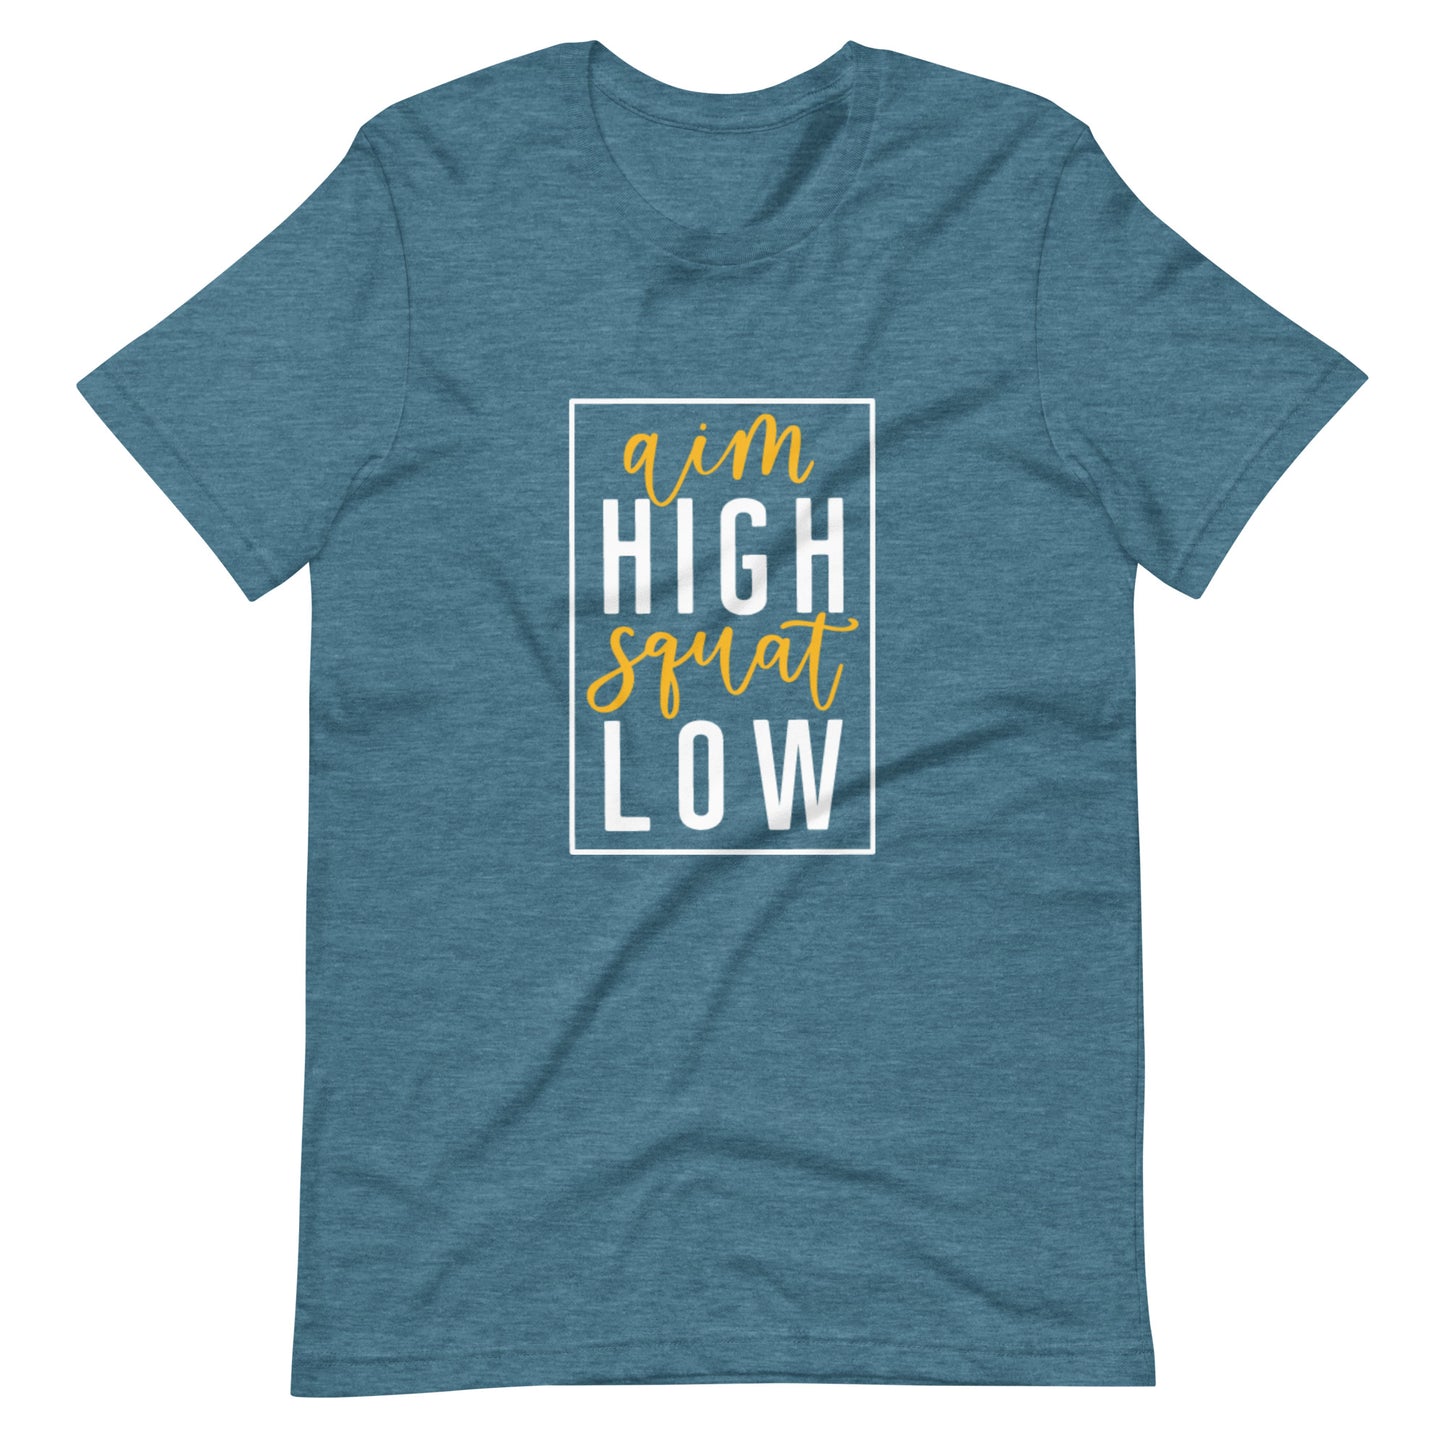 Aim high squat low Unisex Tee The Workout Inspiration